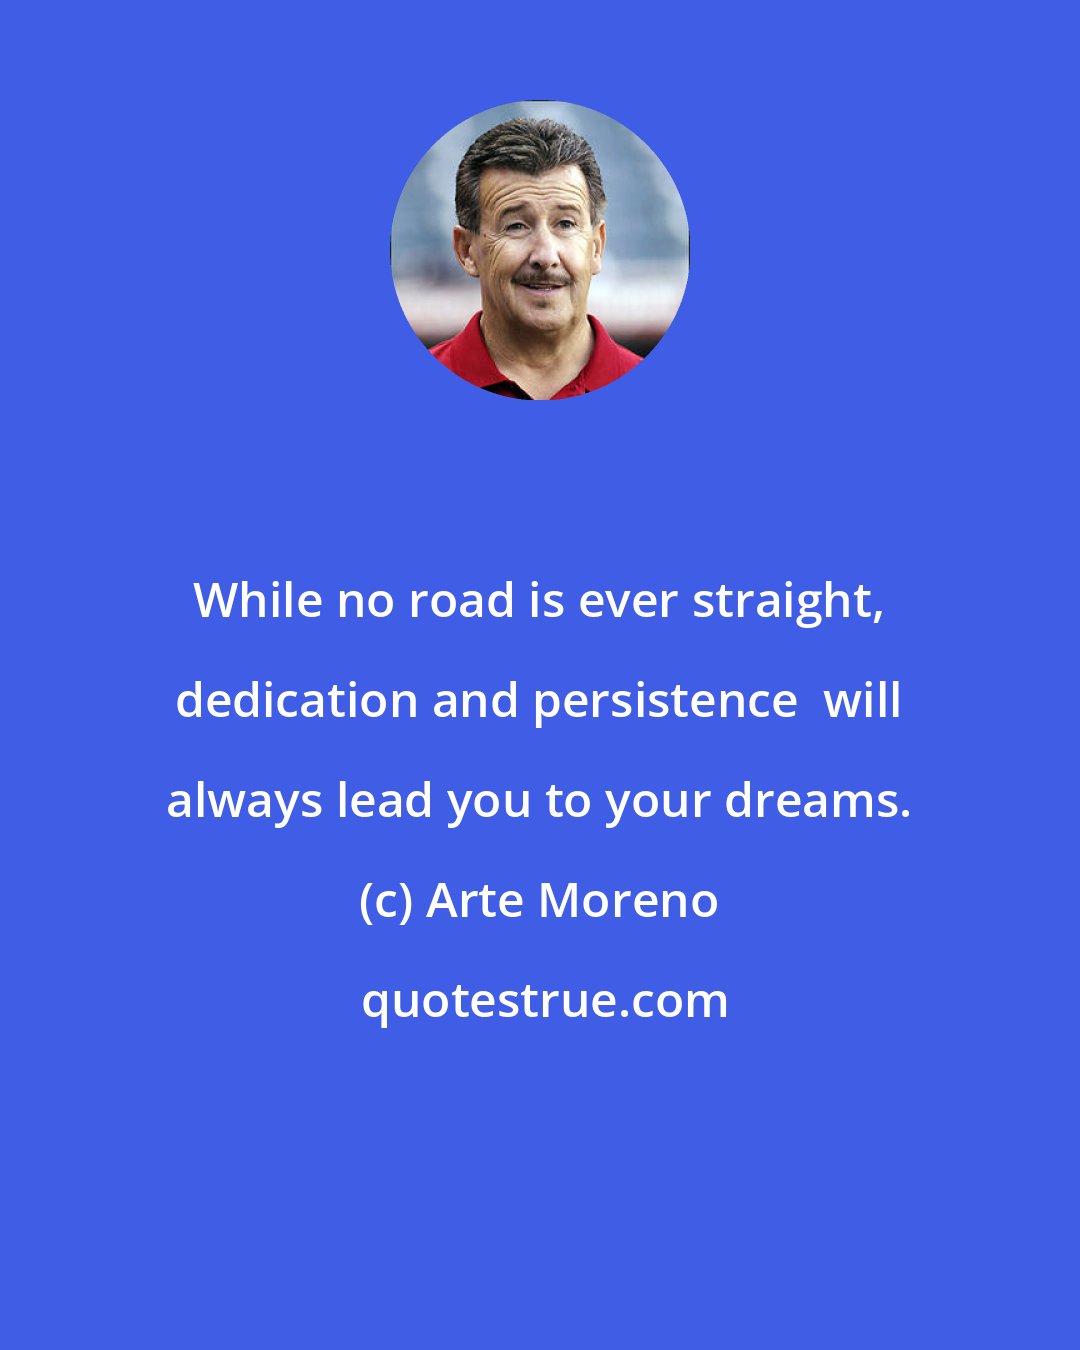 Arte Moreno: While no road is ever straight, dedication and persistence  will always lead you to your dreams.